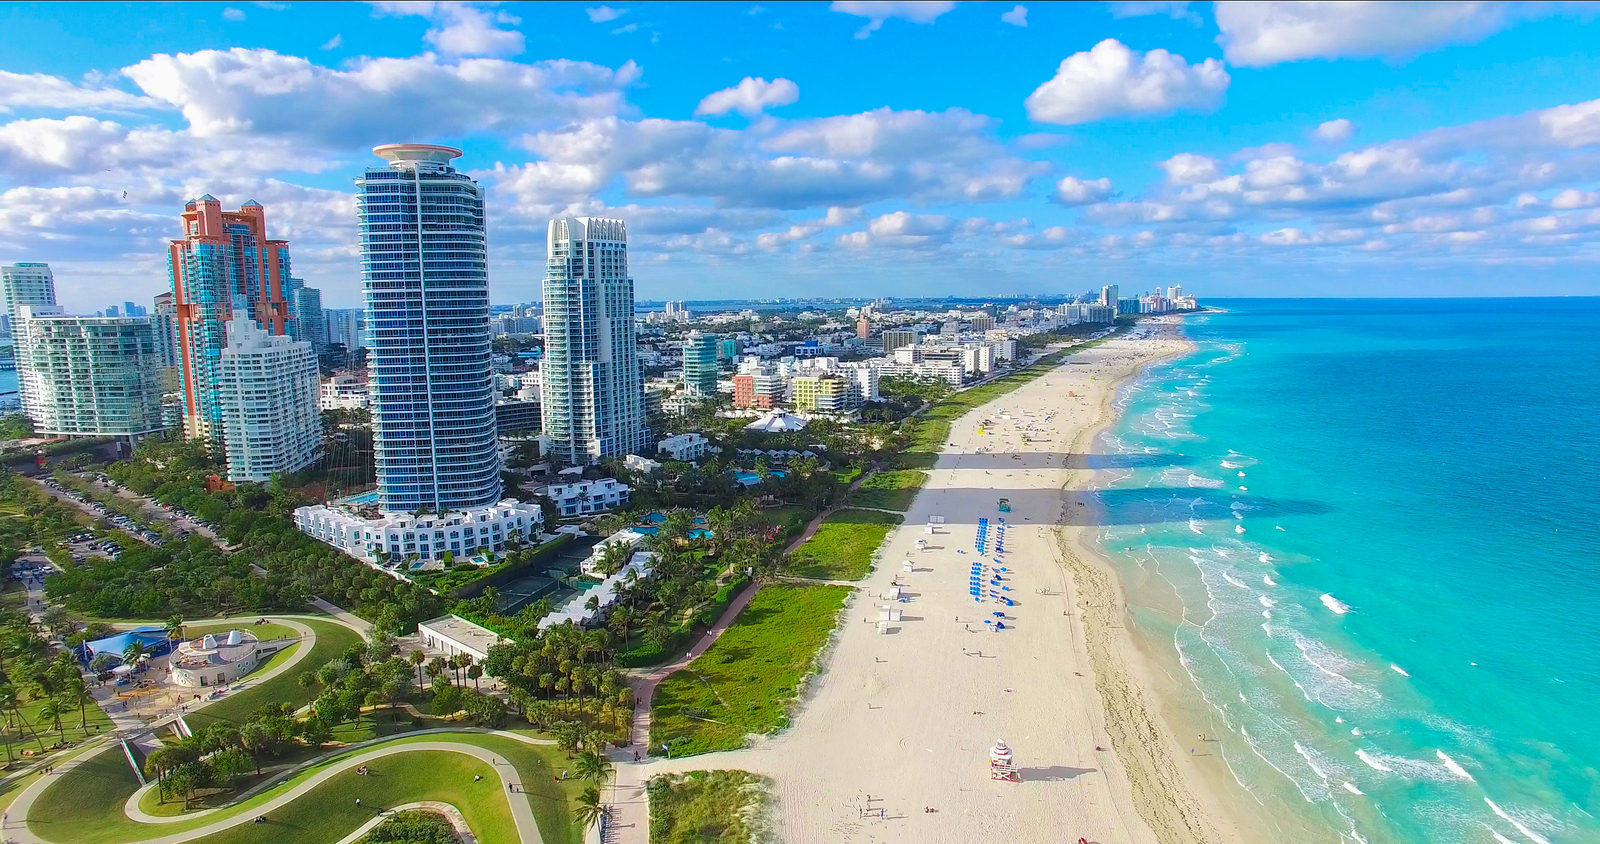 Miami Event Calendar 2022 Miami March 2022: Events, Concerts, Clubs & Things To Do